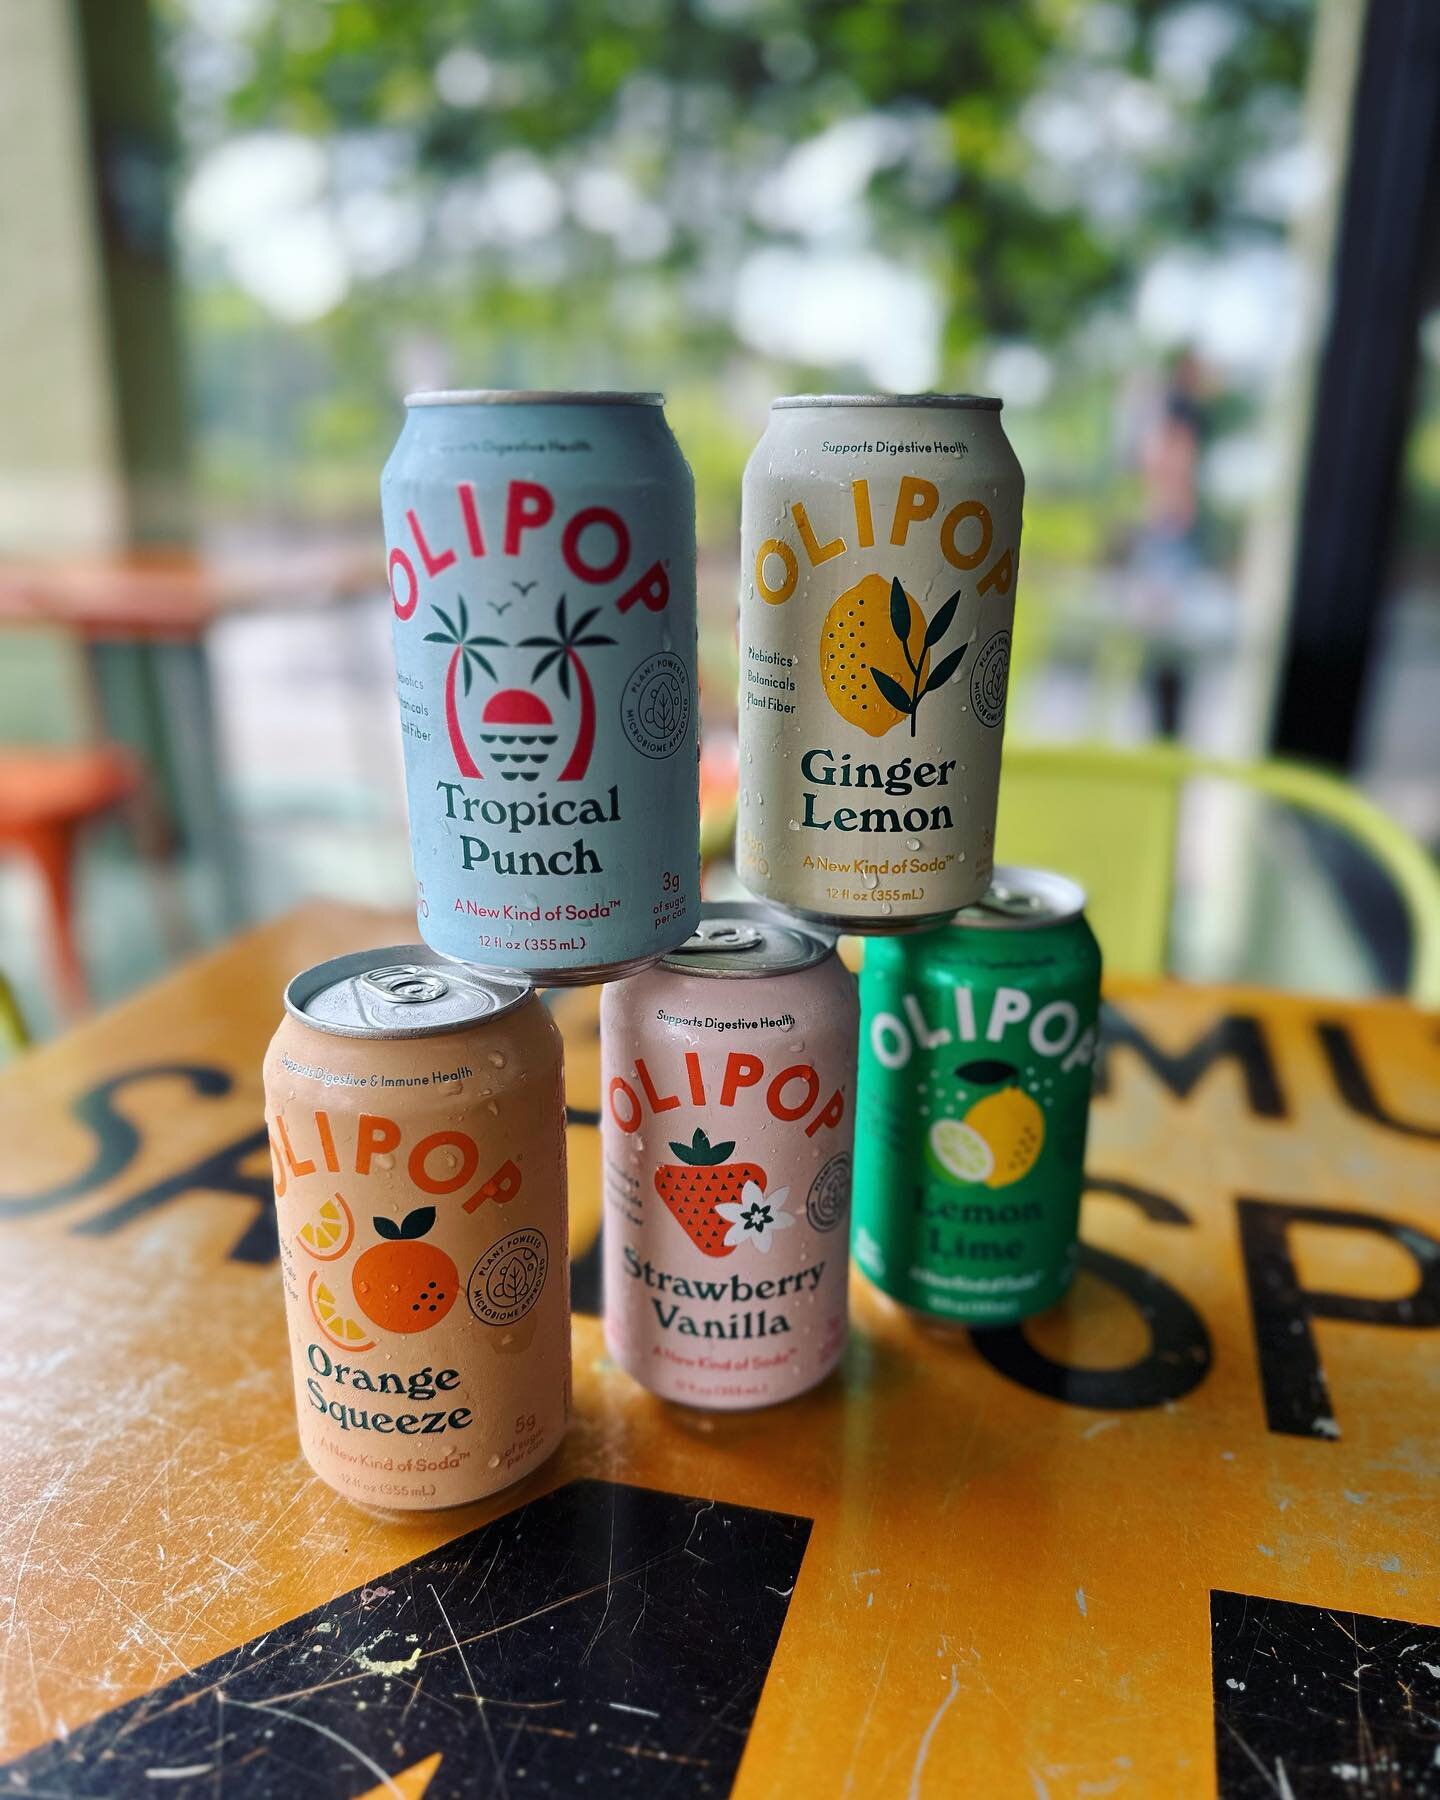 Happy Popping Monday! 🍿 A couple of our most popular grocery items are on special this week! Oilipop PrebioticSoda (Now $1.79) &amp; Angie&rsquo;s Boom Chika Pop popcorn (Now $3.29) Stop in and grab some! 
.
.
.
#olipop #boomchikapop #healthysnacks 